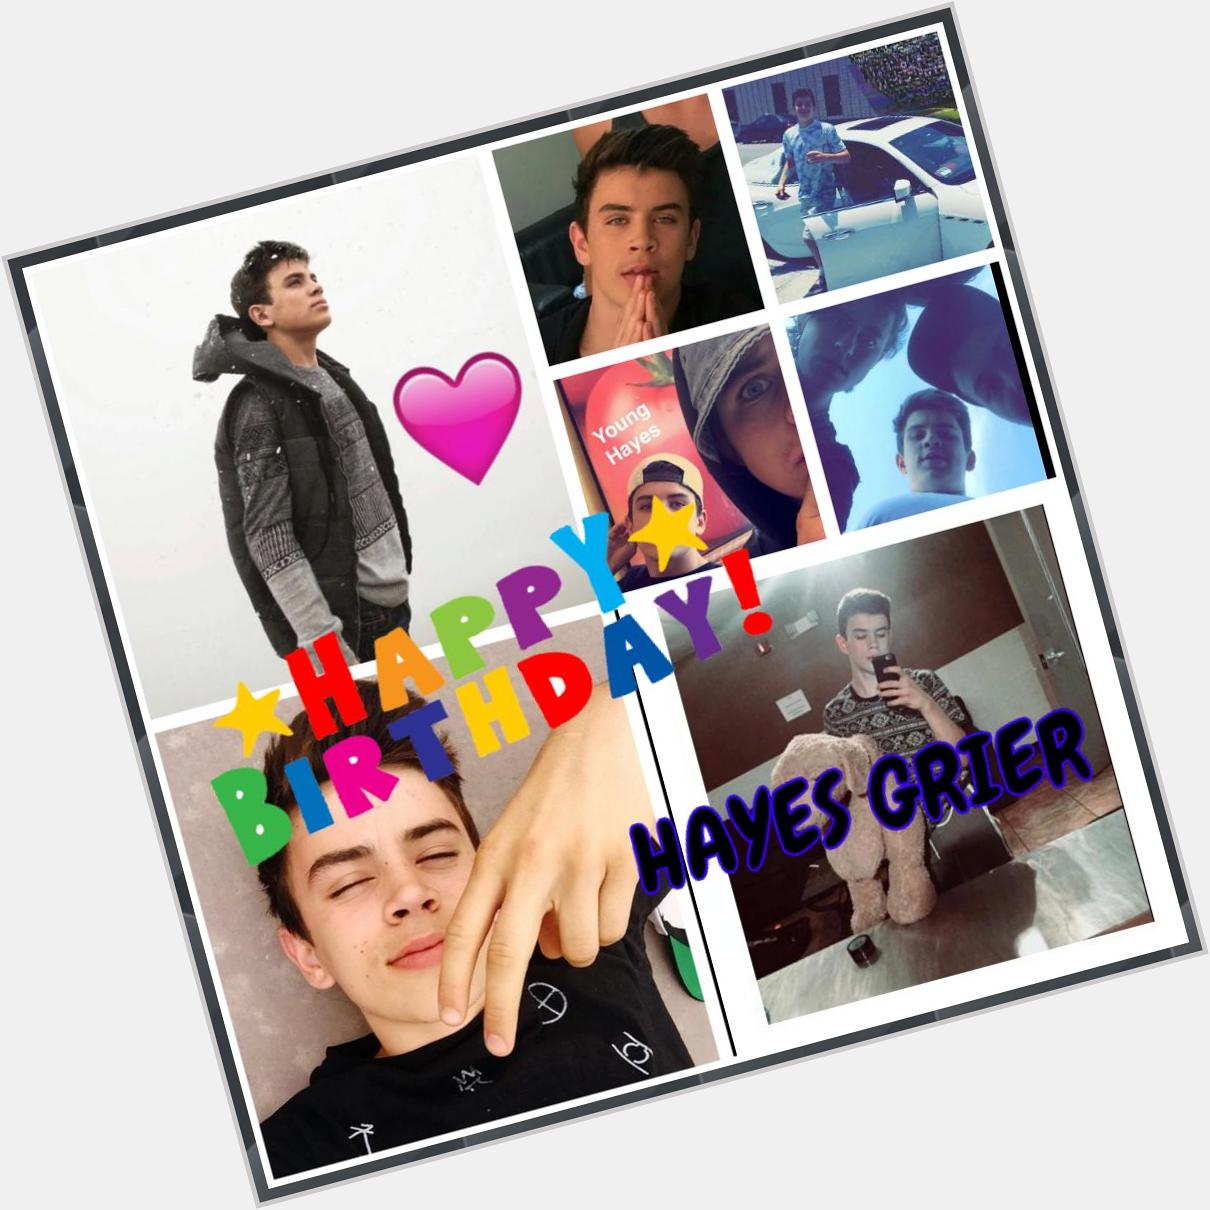 HAPPY BIRTHDAY HAYES GRIER I WISH THE BEST!!!!                   